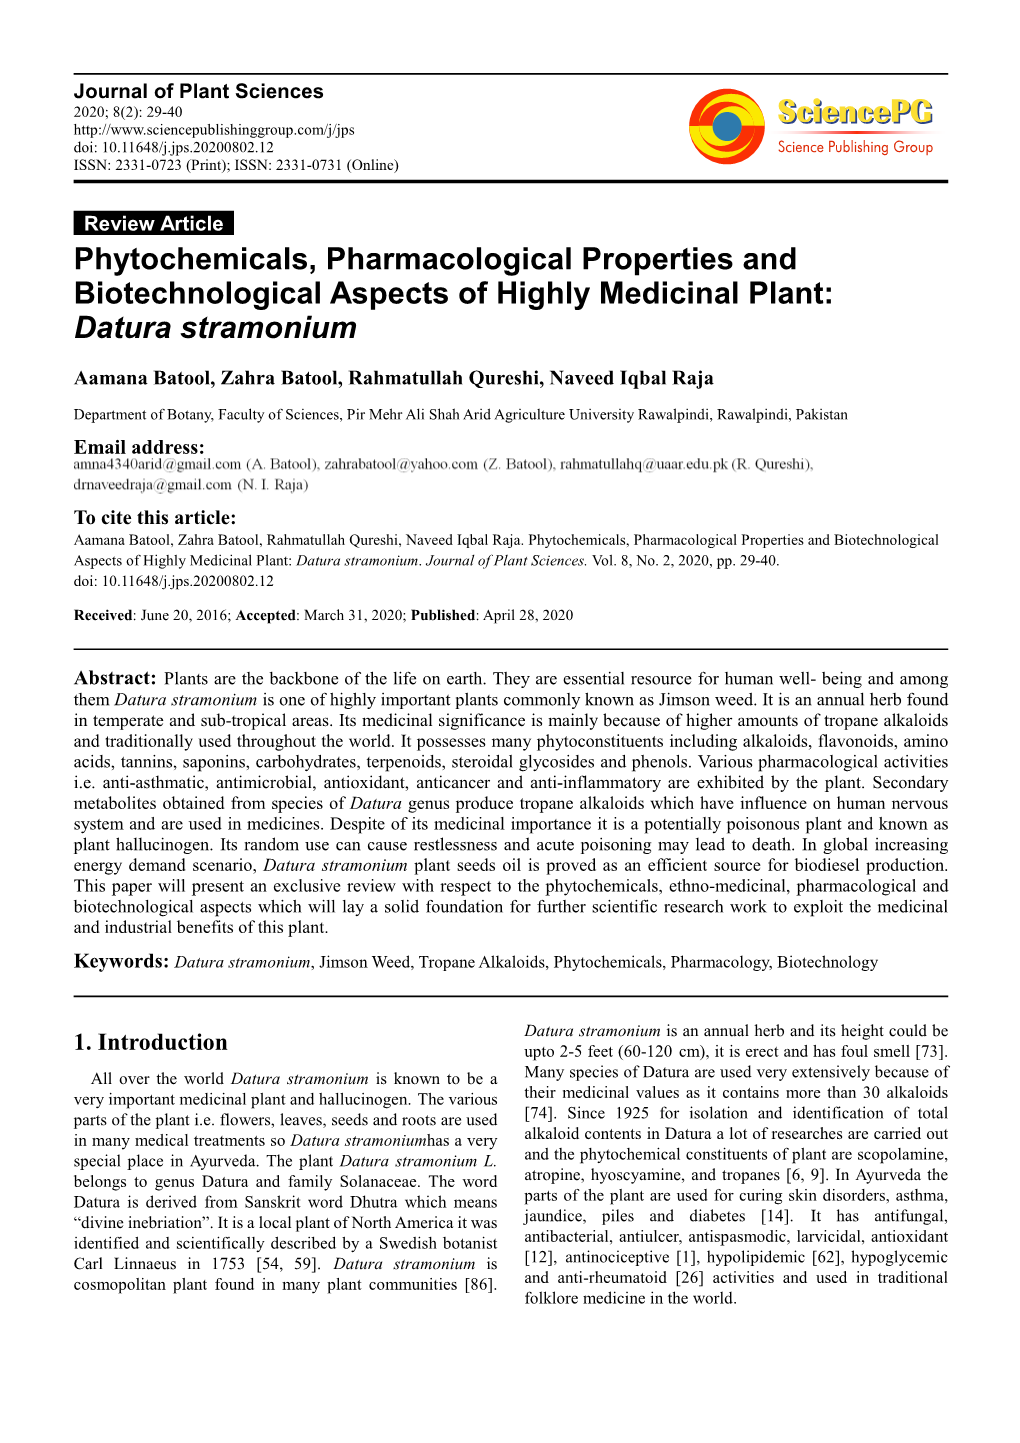 Phytochemicals, Pharmacological Properties and Biotechnological Aspects of Highly Medicinal Plant: Datura Stramonium